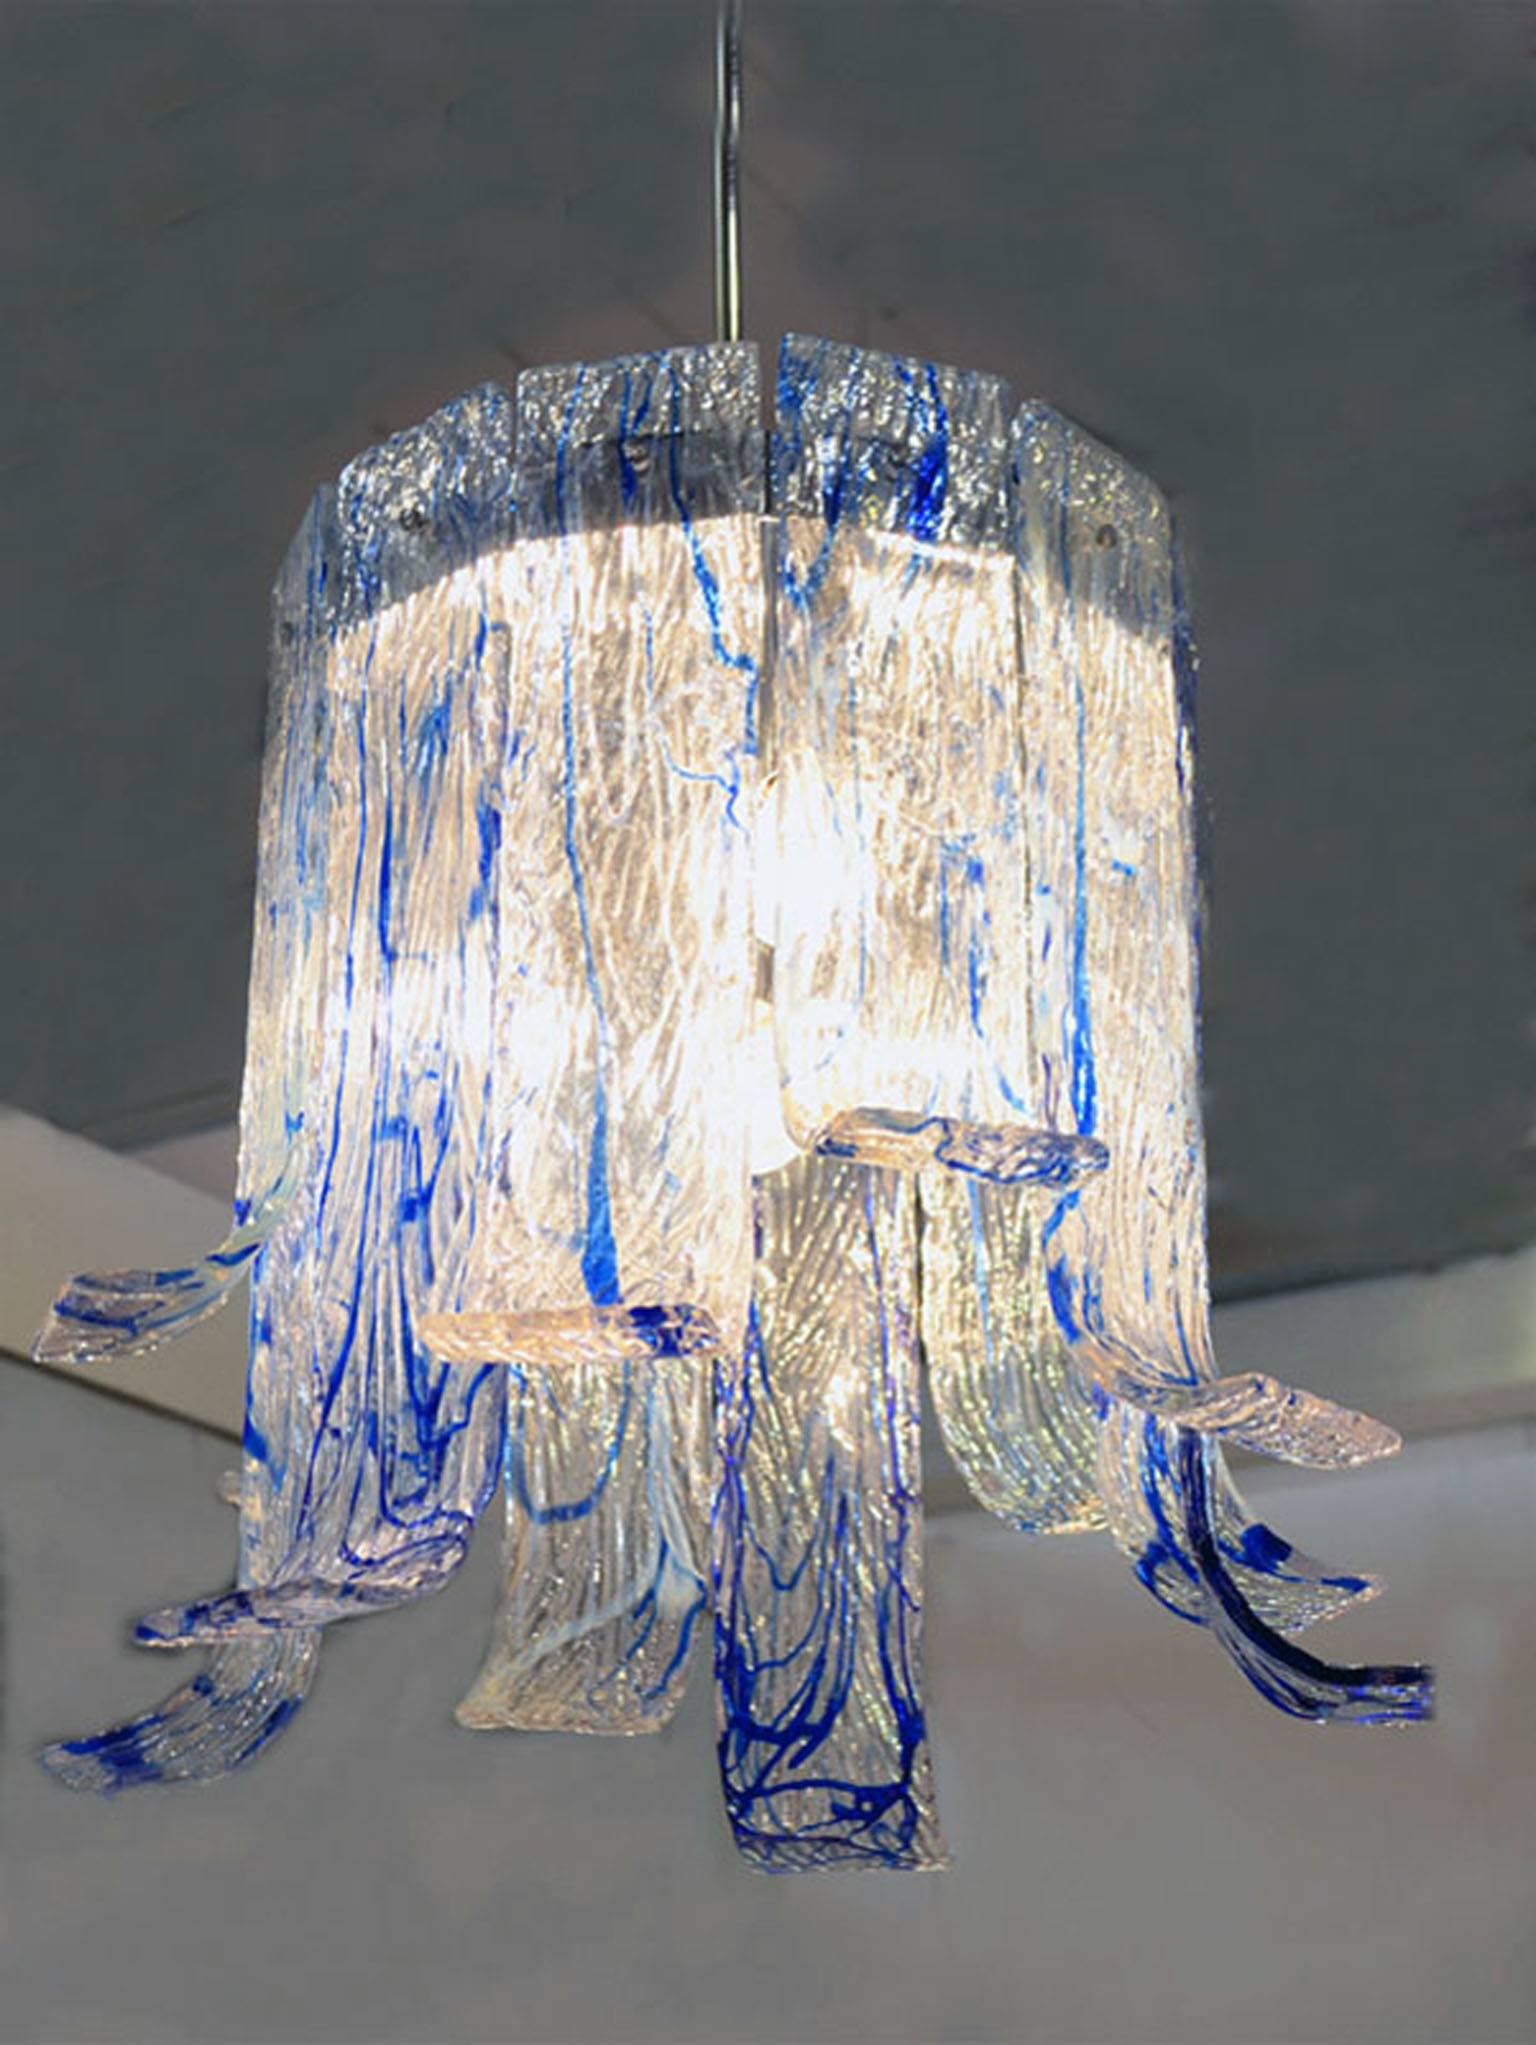 Chandelier produced by Mazzega Murano, 1970s.
Brass structure with glass plates of big and thick in different measures, curved on the bottom.
Transparent glass with hot application of blue glass filament.